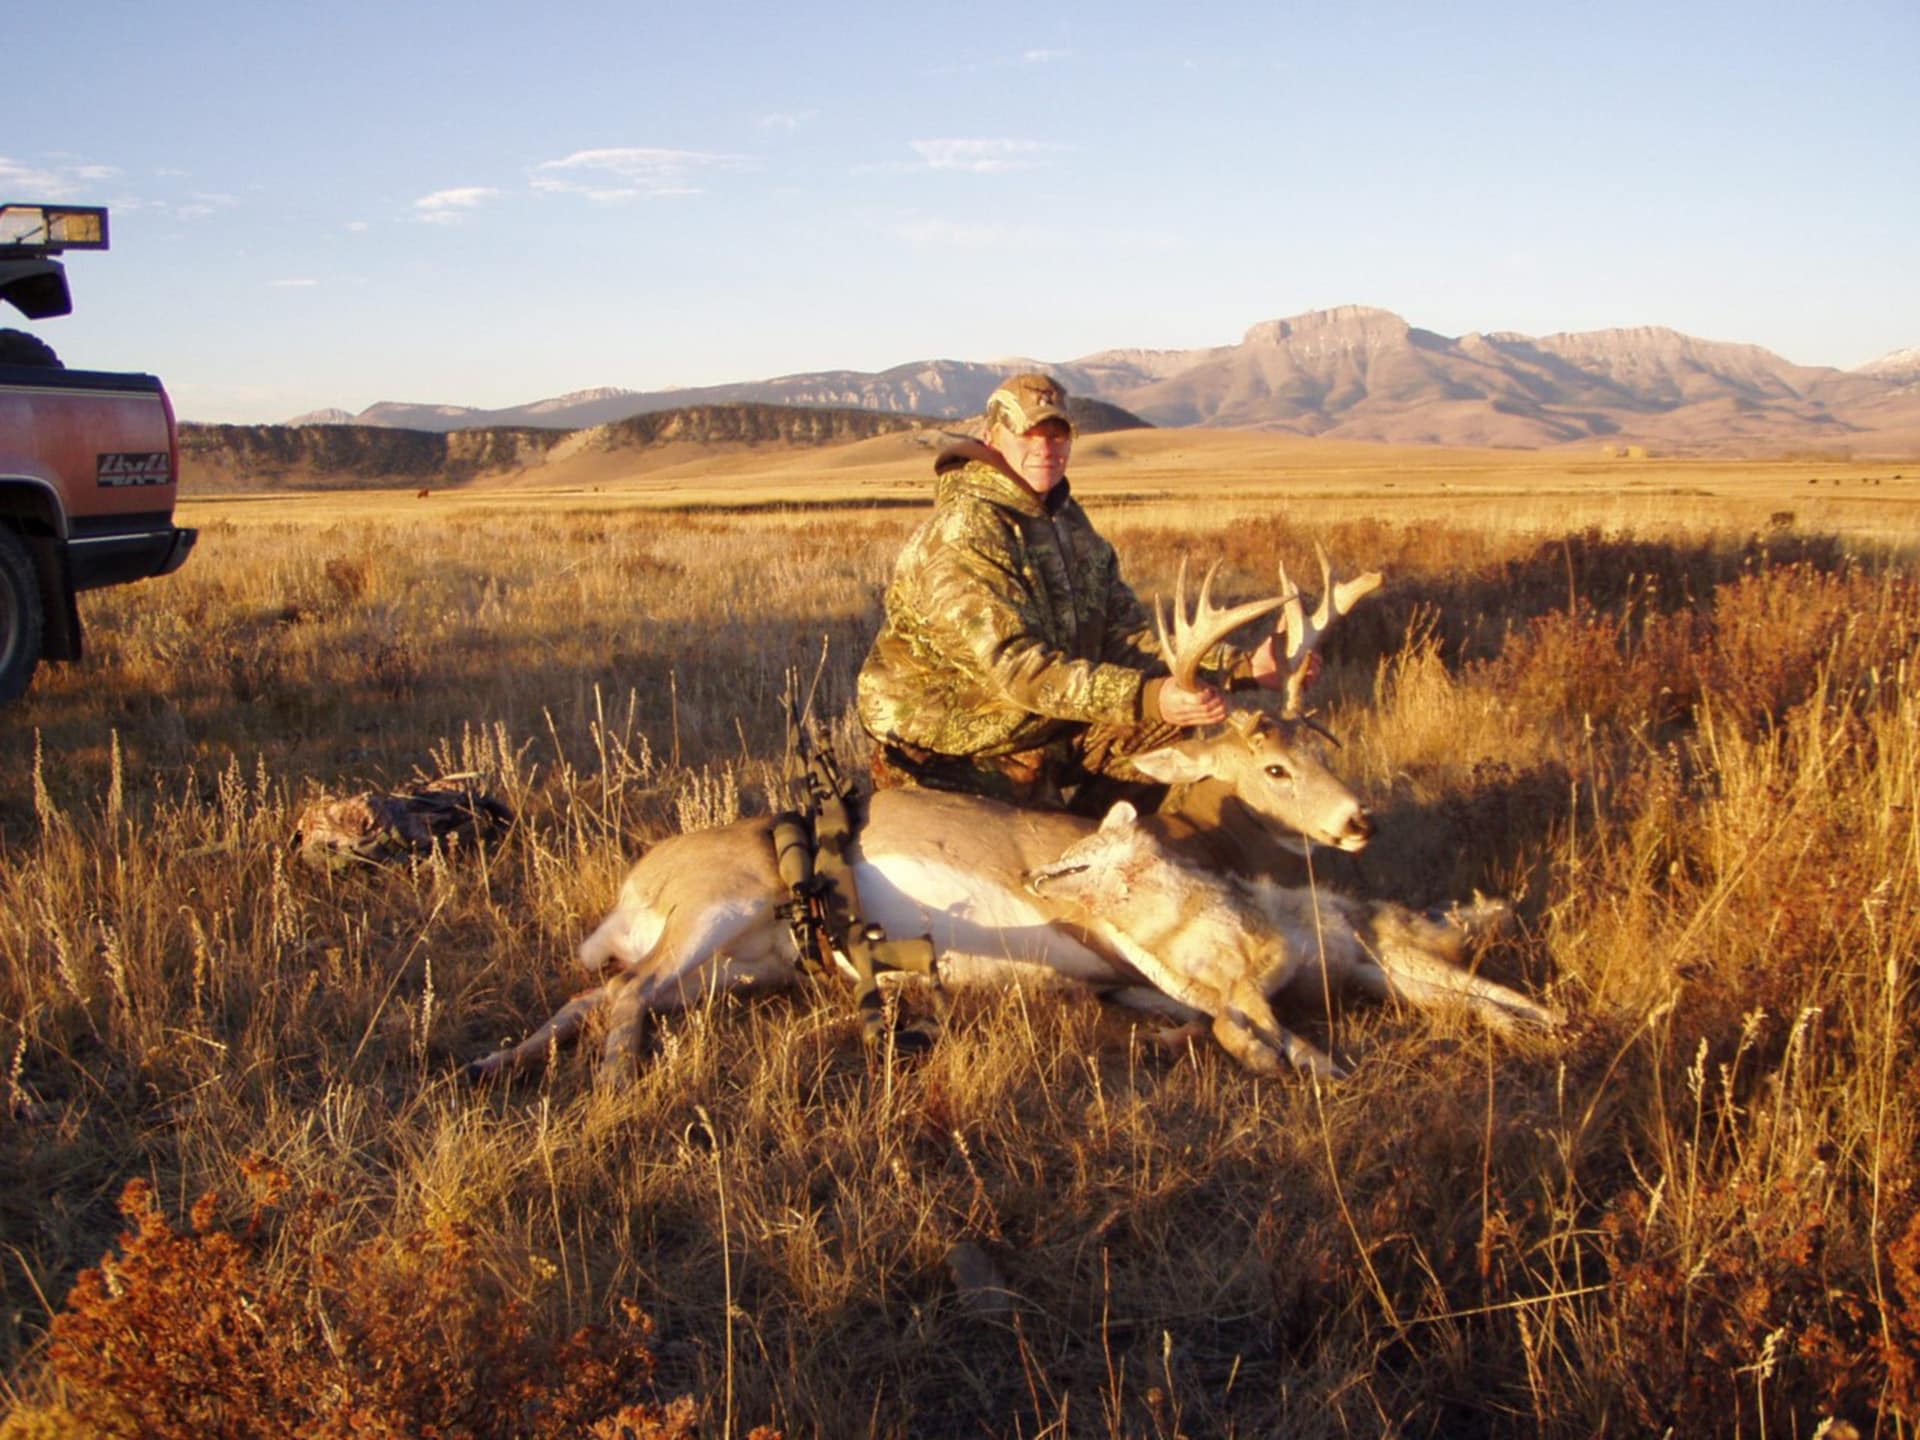 big game hunting land for sale montana north fork willow creek ranch